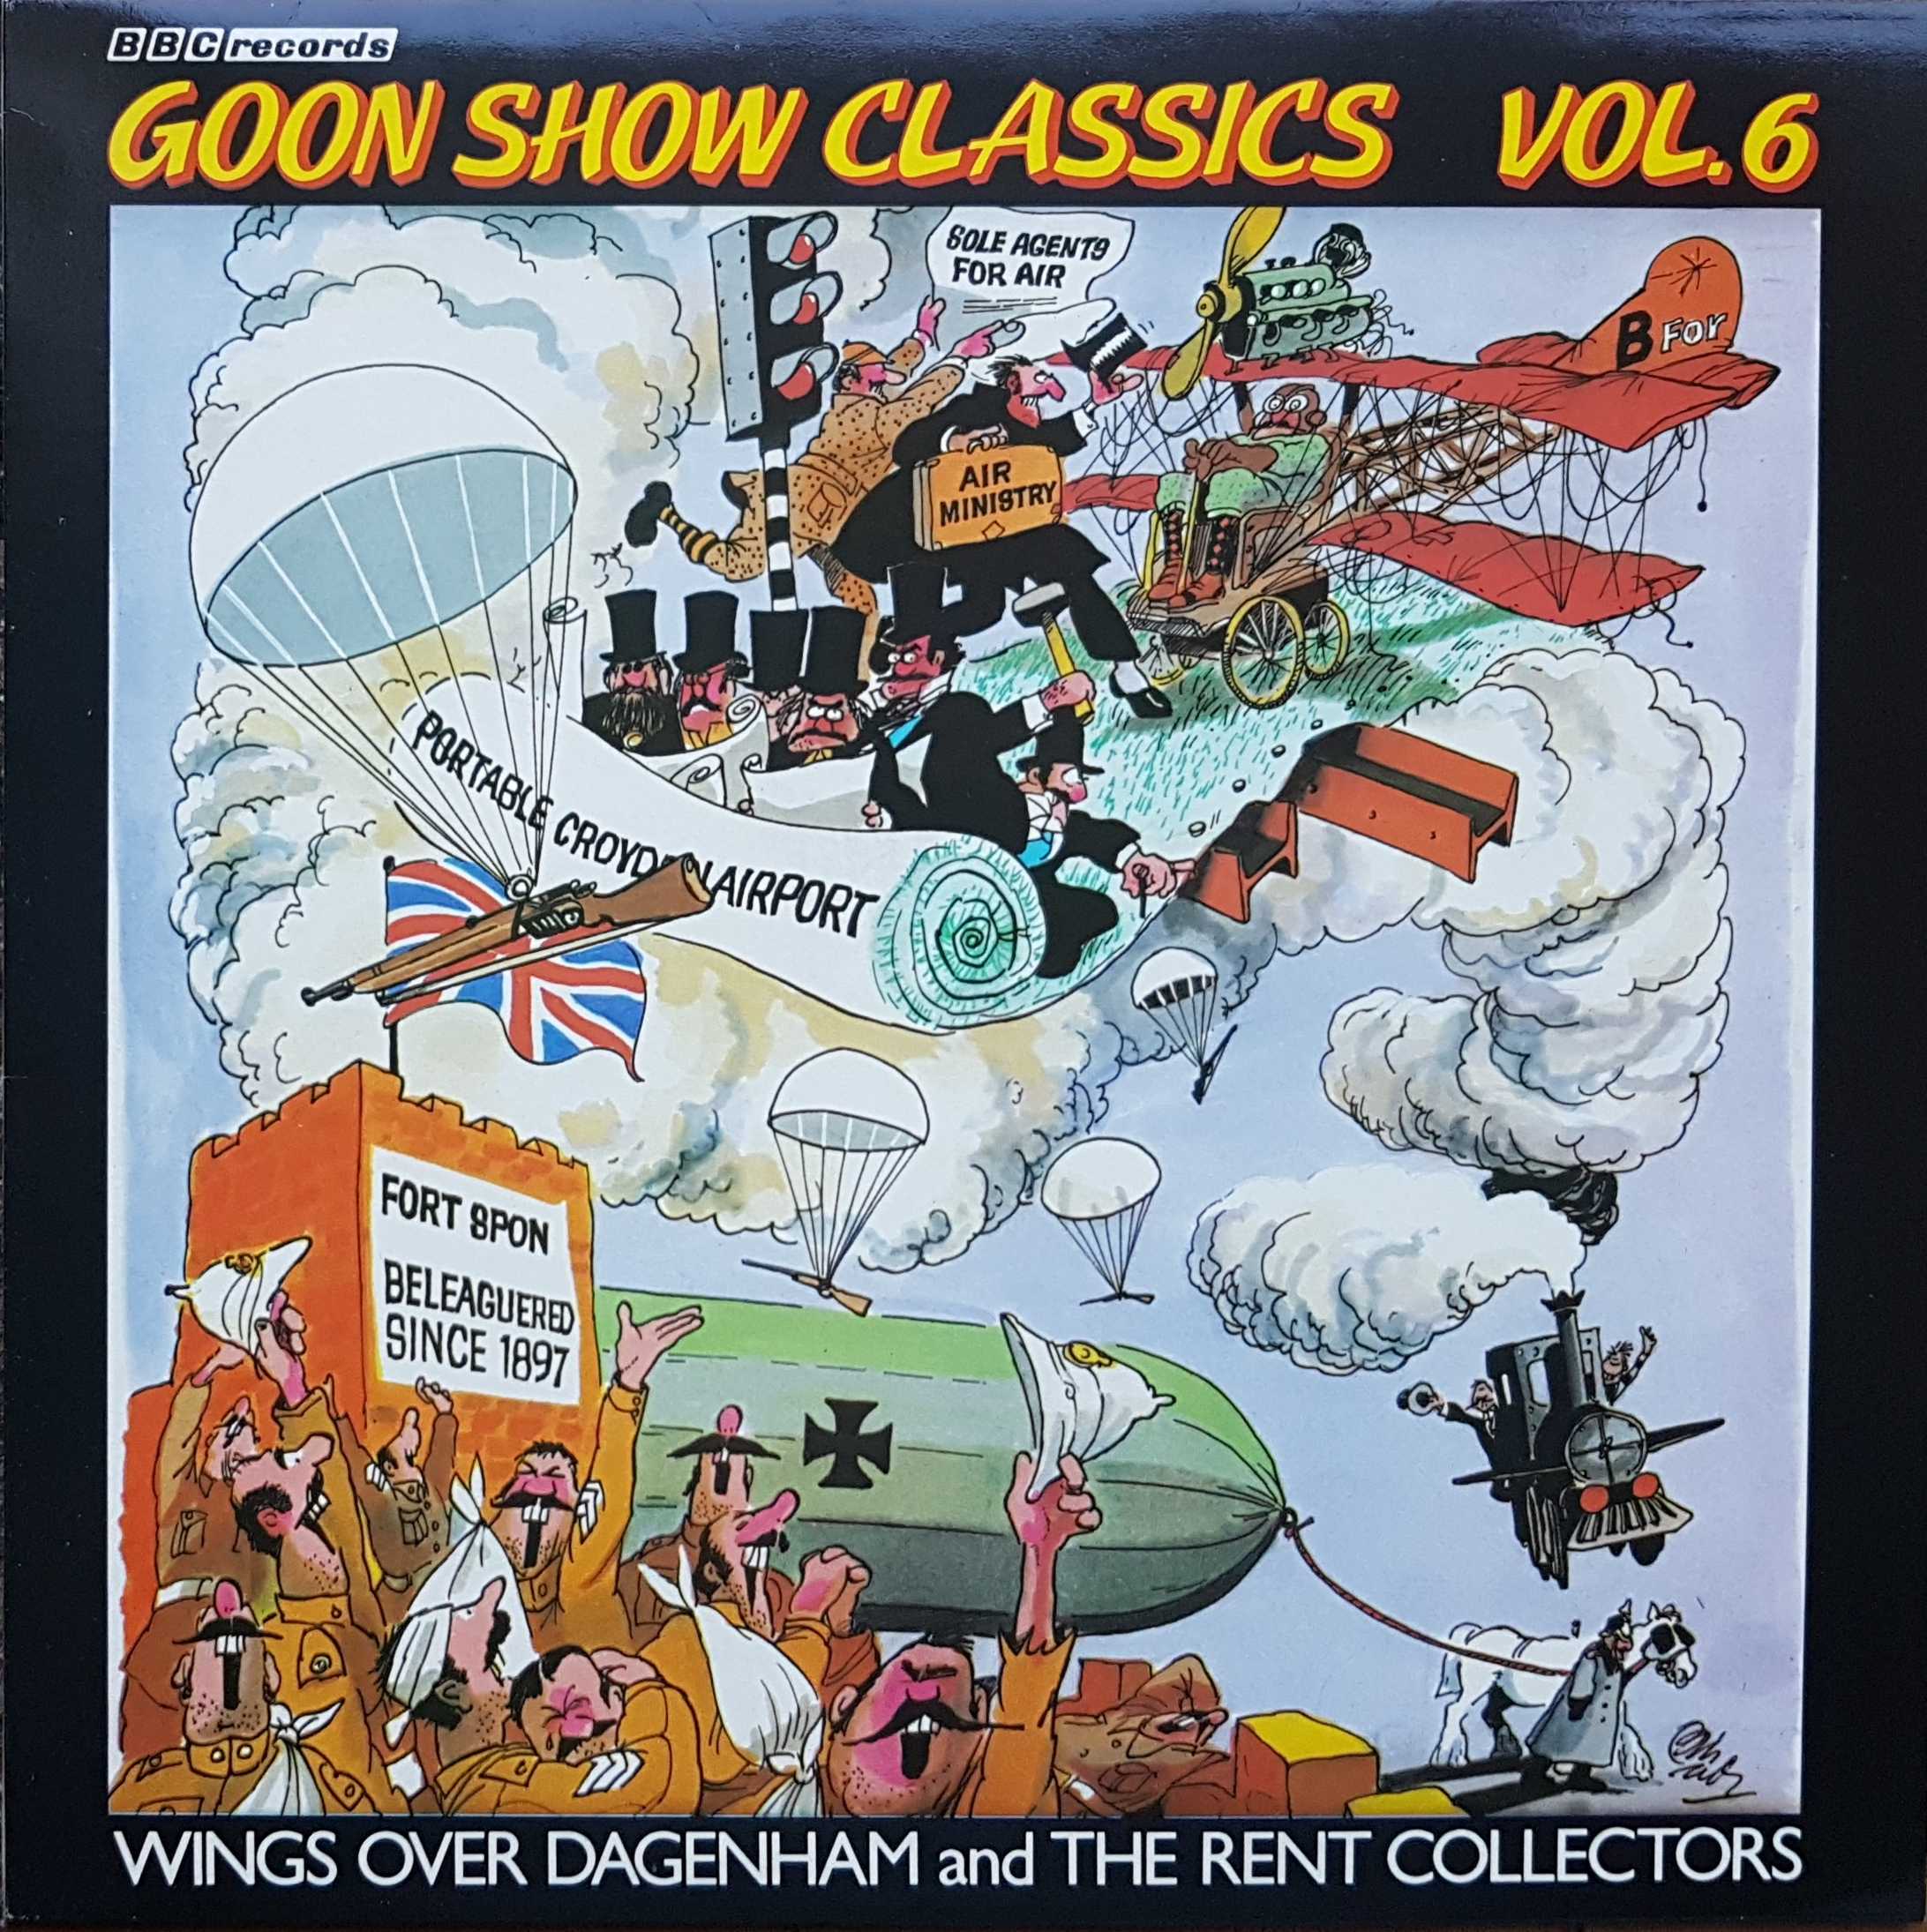 Picture of REB 366 Goon show classics - Volume 6 by artist Spike Milligan / Larry Stephens from the BBC albums - Records and Tapes library